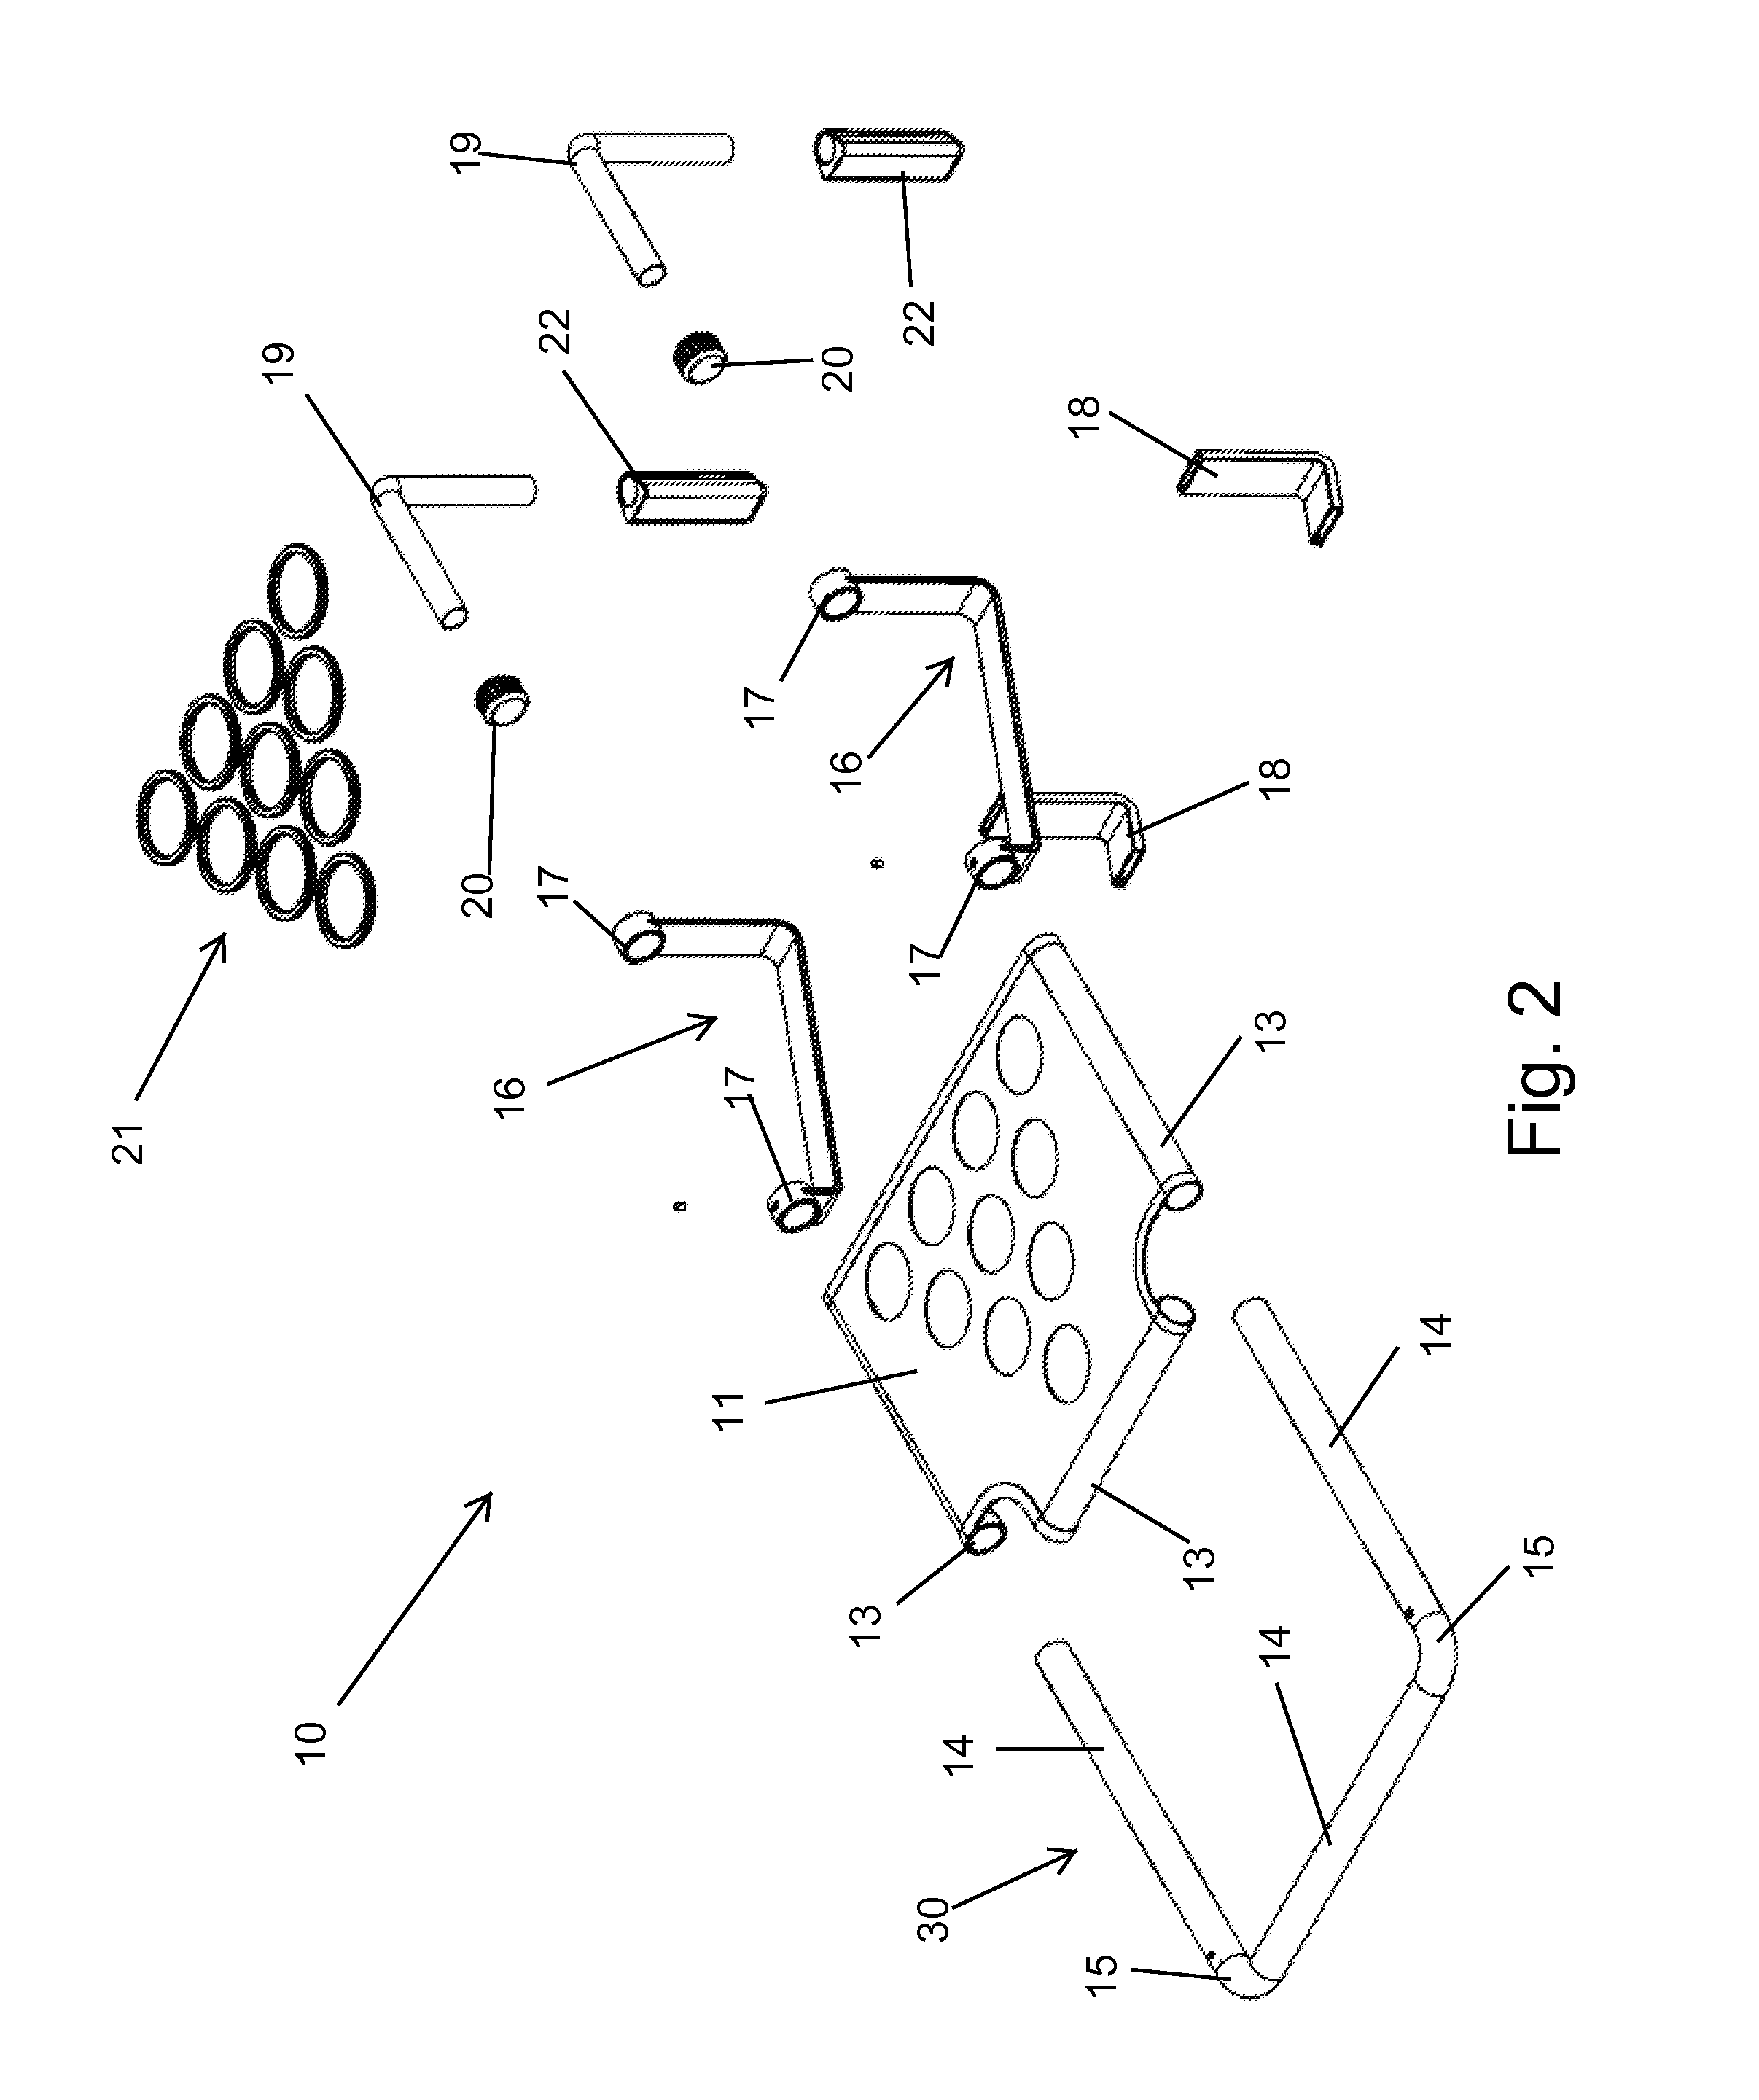 Portable beer pong apparatus and associated method